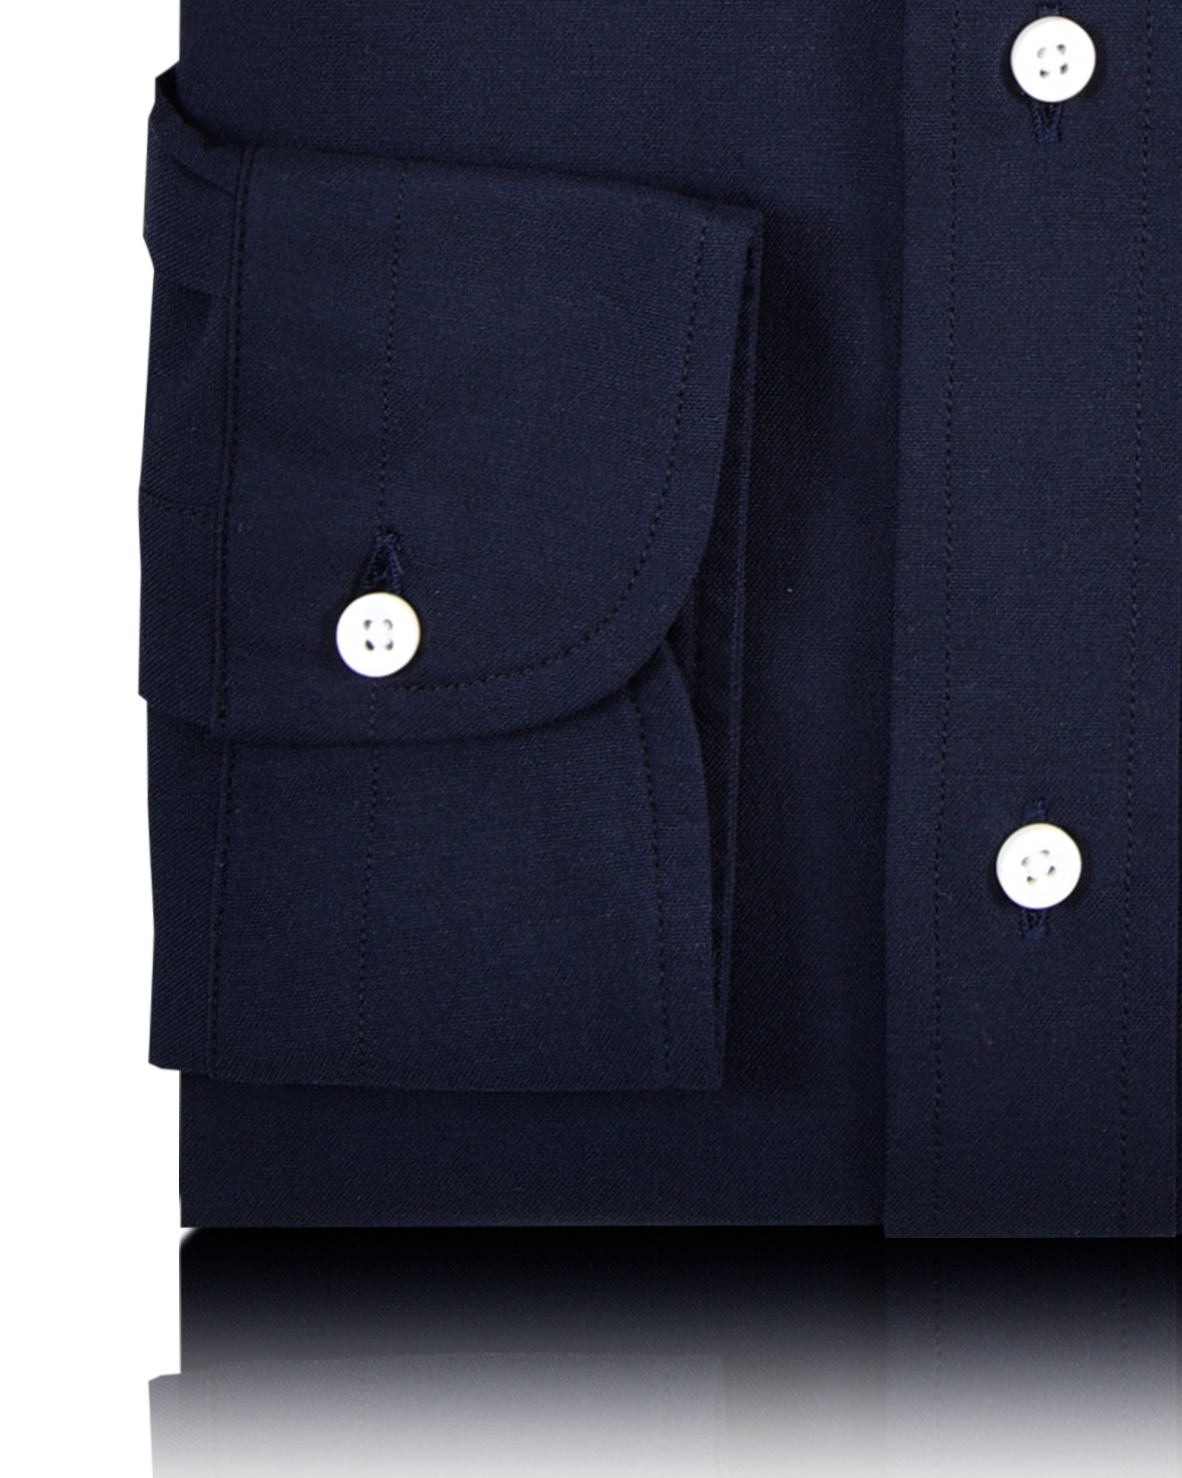 Cuff of the custom oxford shirt for men by Luxire in navy